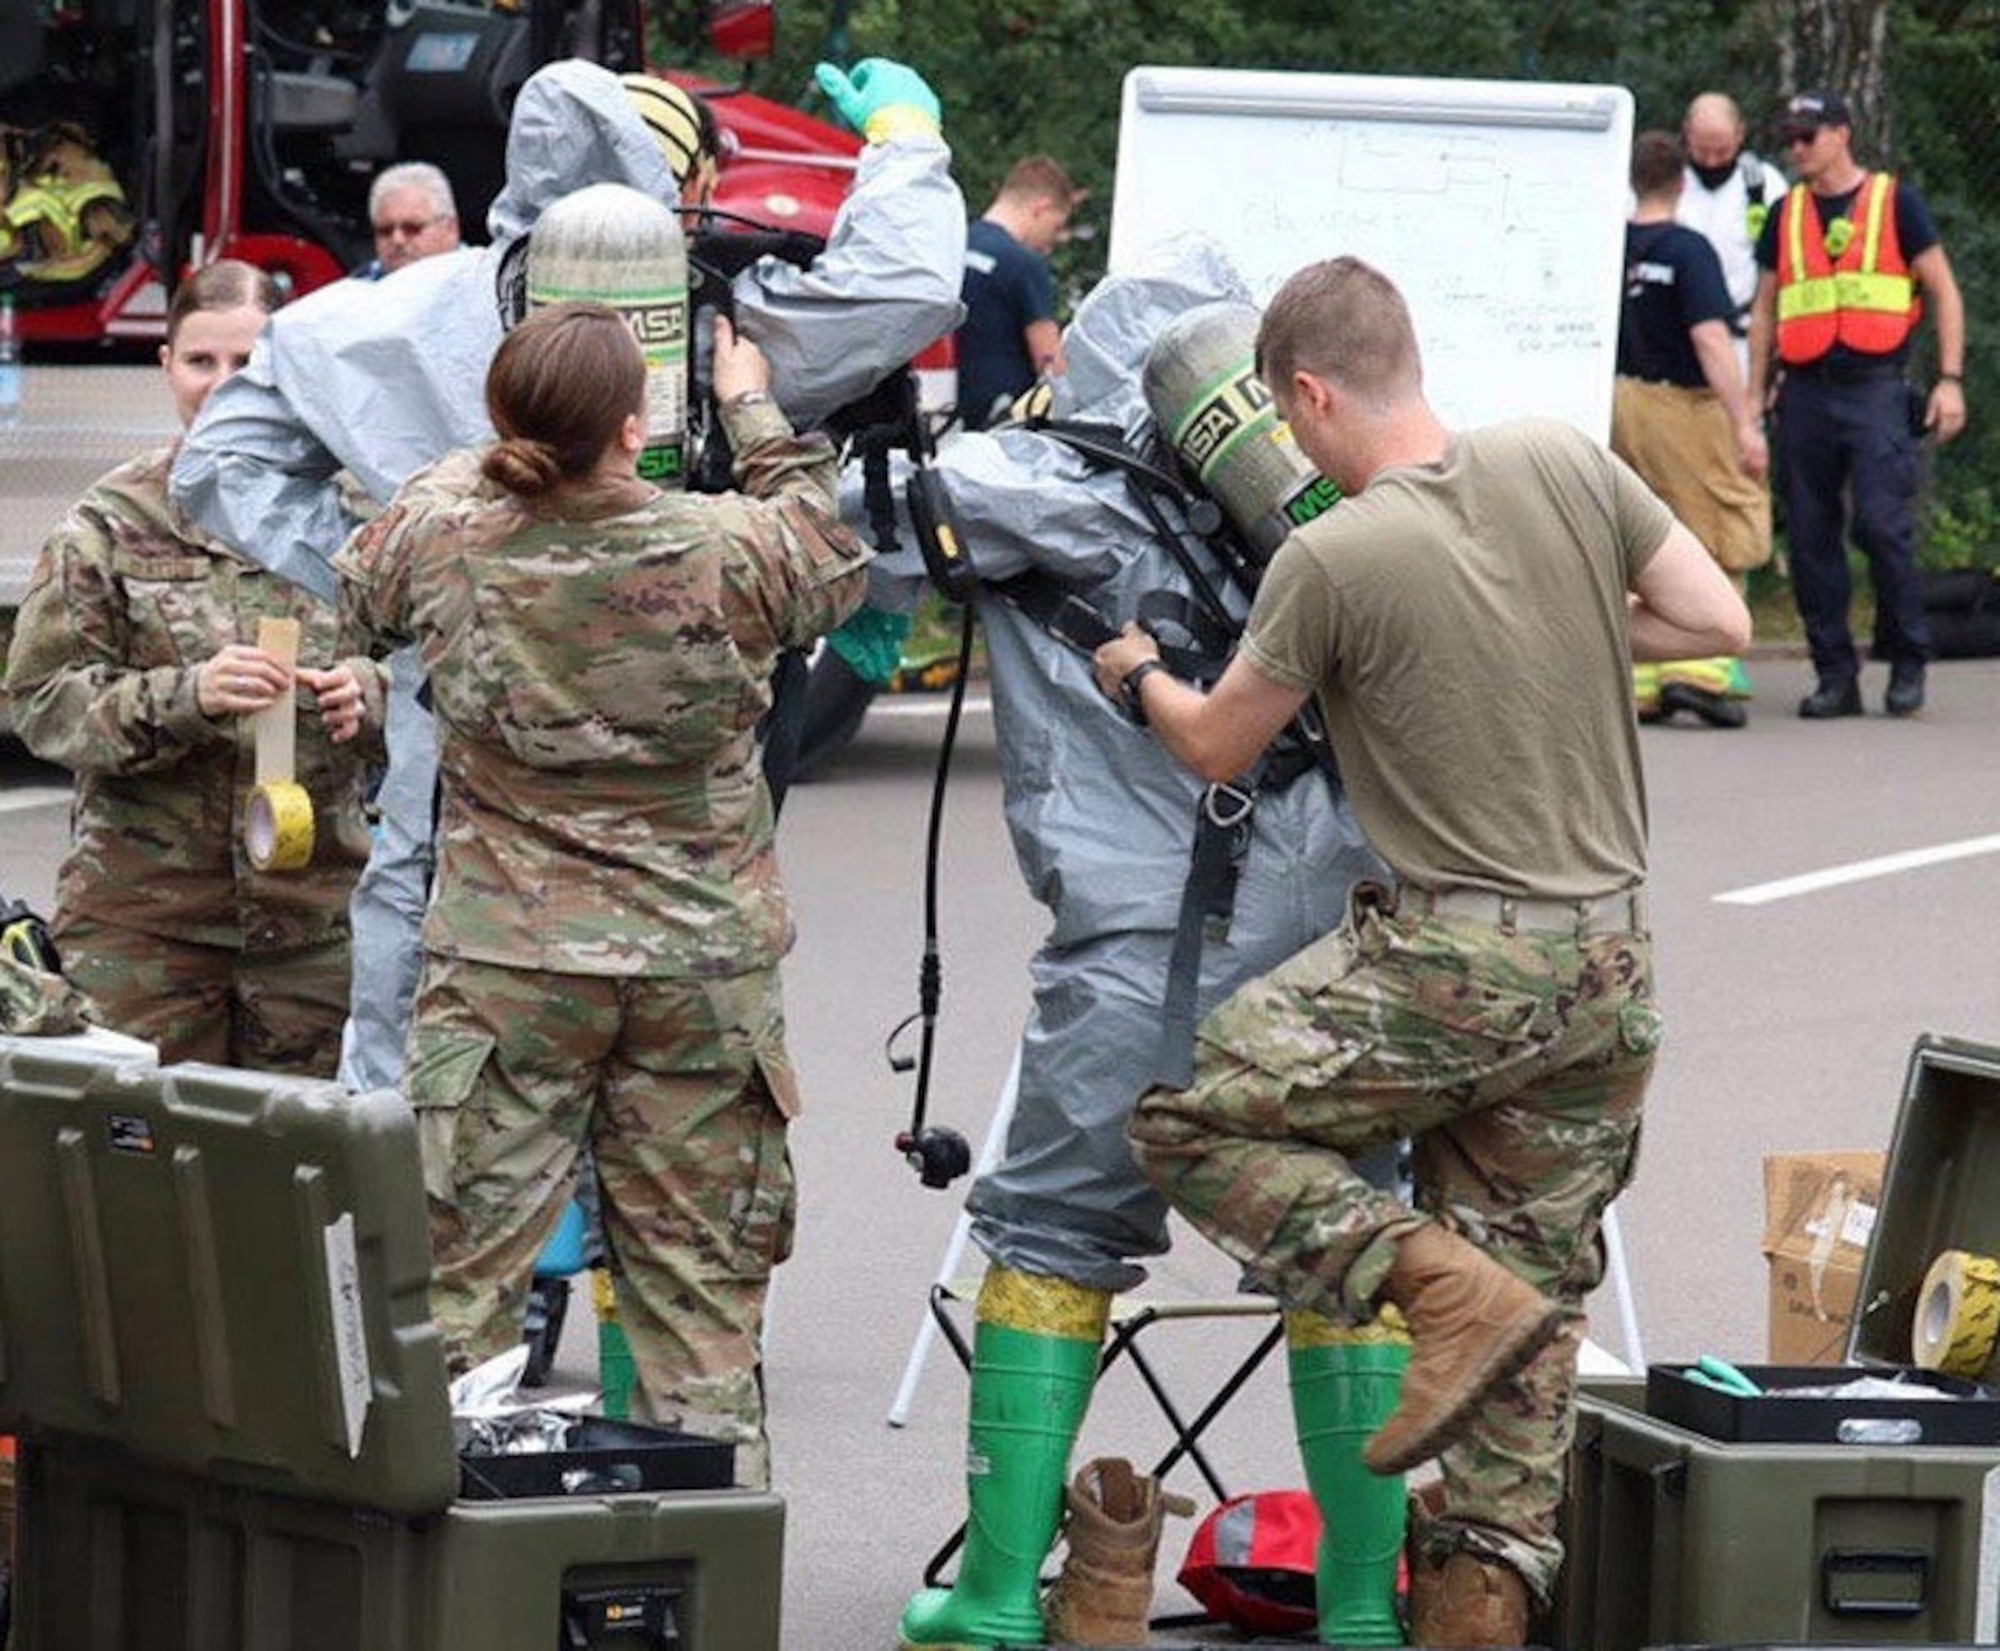 U.S. Air Force Airmen, assigned to the 786th Civil Engineer Squadron Emergency Management flight assist fellow Airmen on response Team 1 don personal protective equipment in Level B suits so they can safely make entry into a potentially contaminated area at Landstuhl Regional Medical Center, Germany, June 16, 2020.